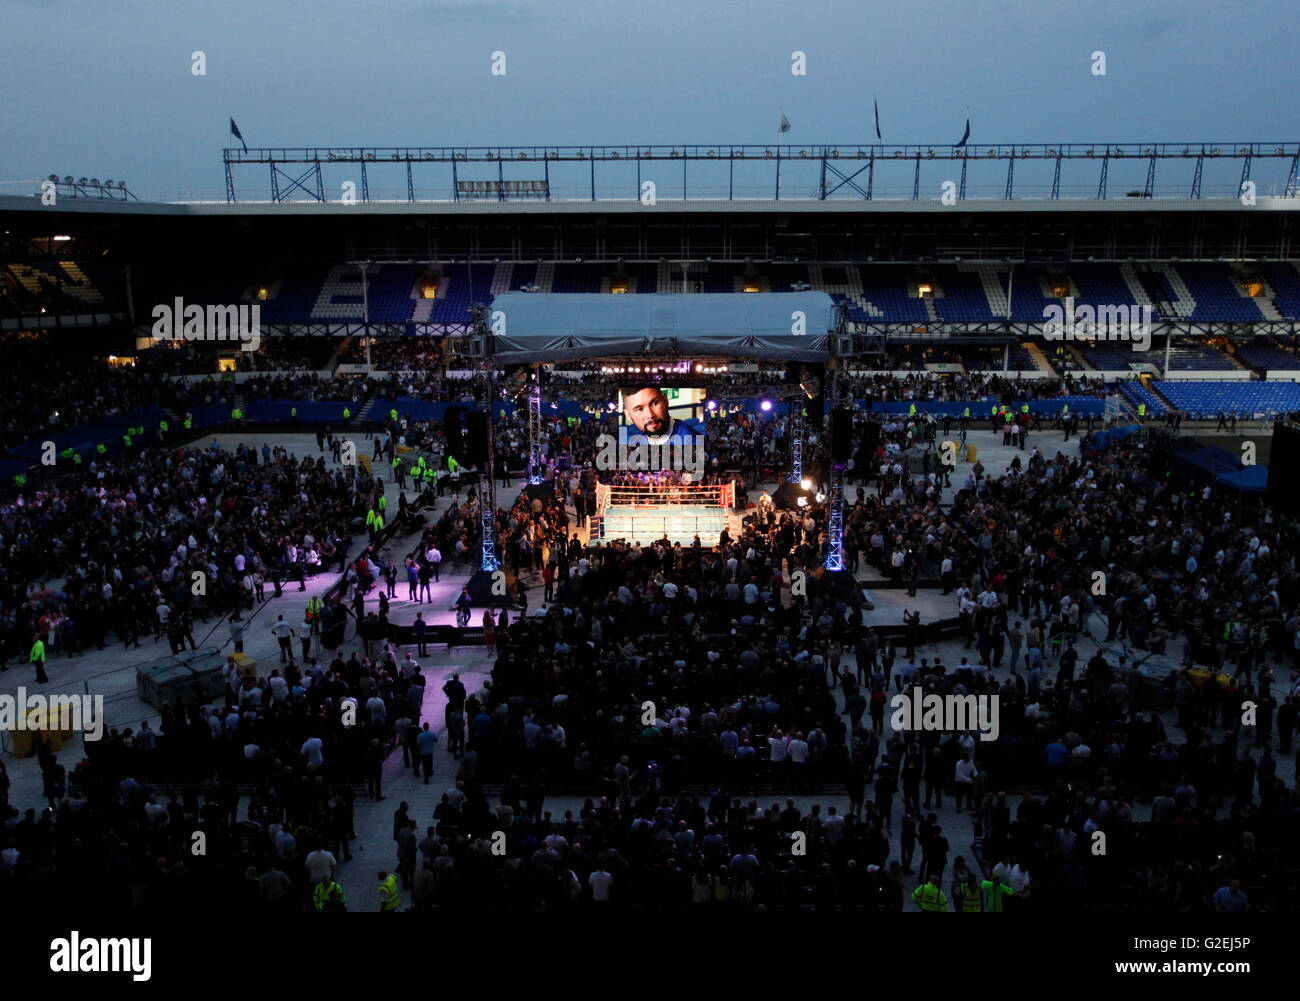 Goodison Park, Liverpool, UK. 29th May, 2016. WBC Cruiserweight Title. Tony Bellew versus Ilunga Makabu. A general view of Goodison Park, hosting tonight's WBC Cruiserweight World Championship fight. The famous old ground was the venue for the boxing match between &quot;Pretty&quot; Ricky Conlan (played by Tony Bellew) and Adonis Creed in the 2015 film 'Creed'. Tonight's event is the outdoor boxing event staged in Liverpool since 1949. Credit:  Action Plus Sports/Alamy Live News Stock Photo